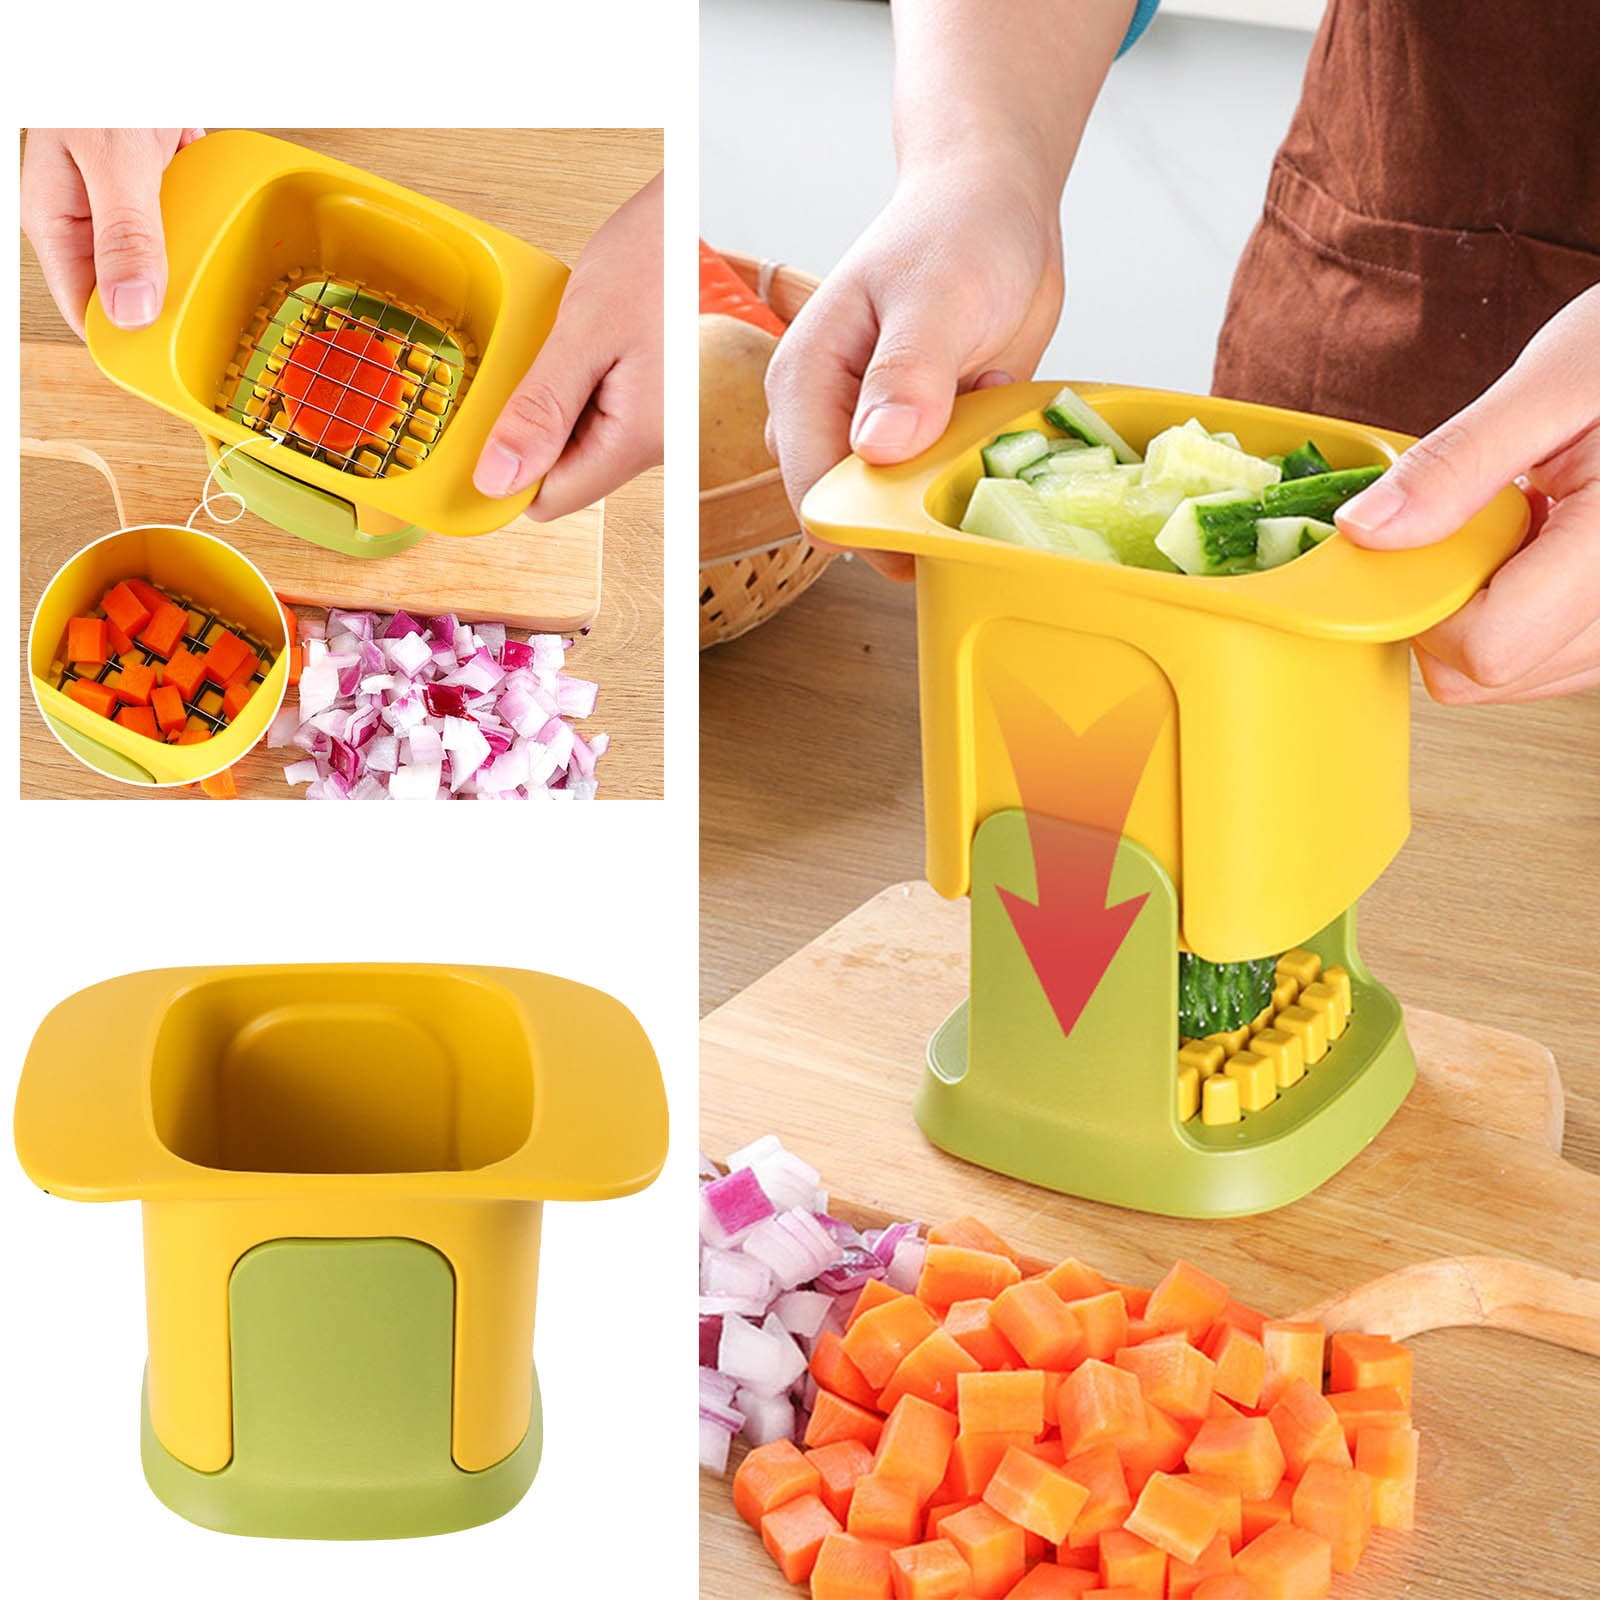 Vegetable Chopper Manual Hand, Multifunctional Food Choppers, Onion Vegetable Dicer, Fruit & Vegetable Cutter Cubes, Veggie Chopper with Stainless